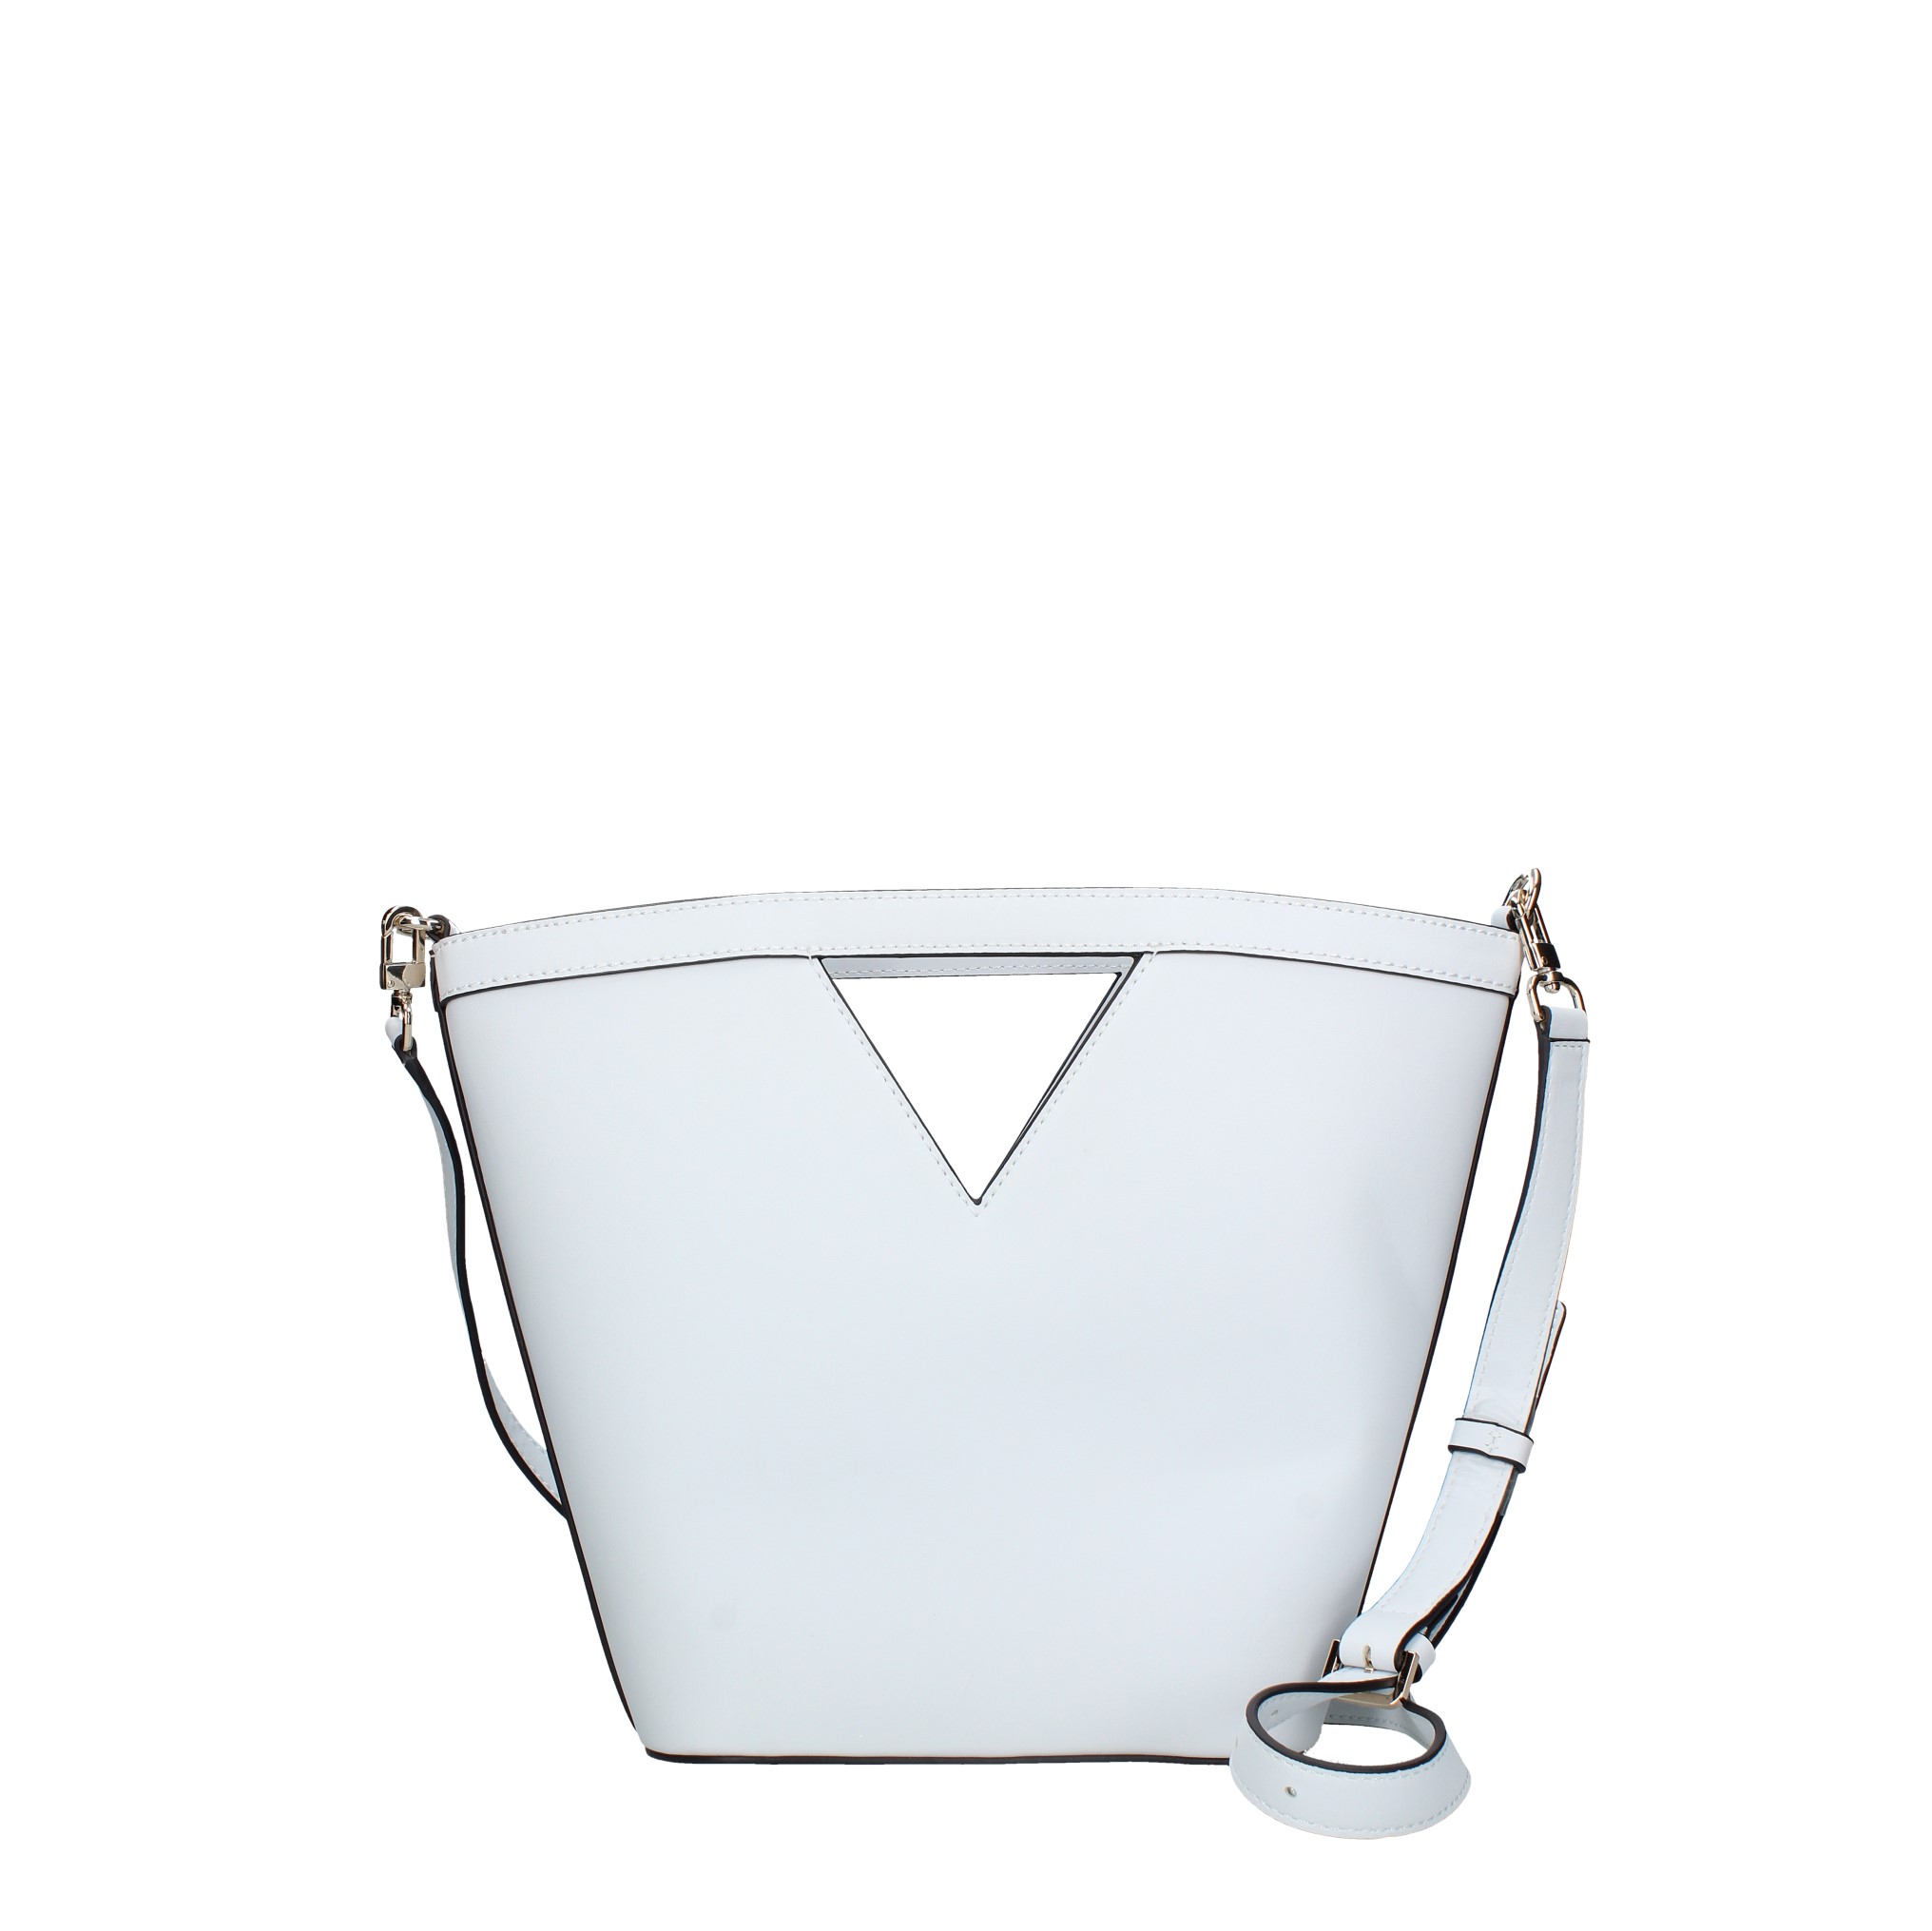 Hand and shoulder bags White - GUESS - Ginevra calzature